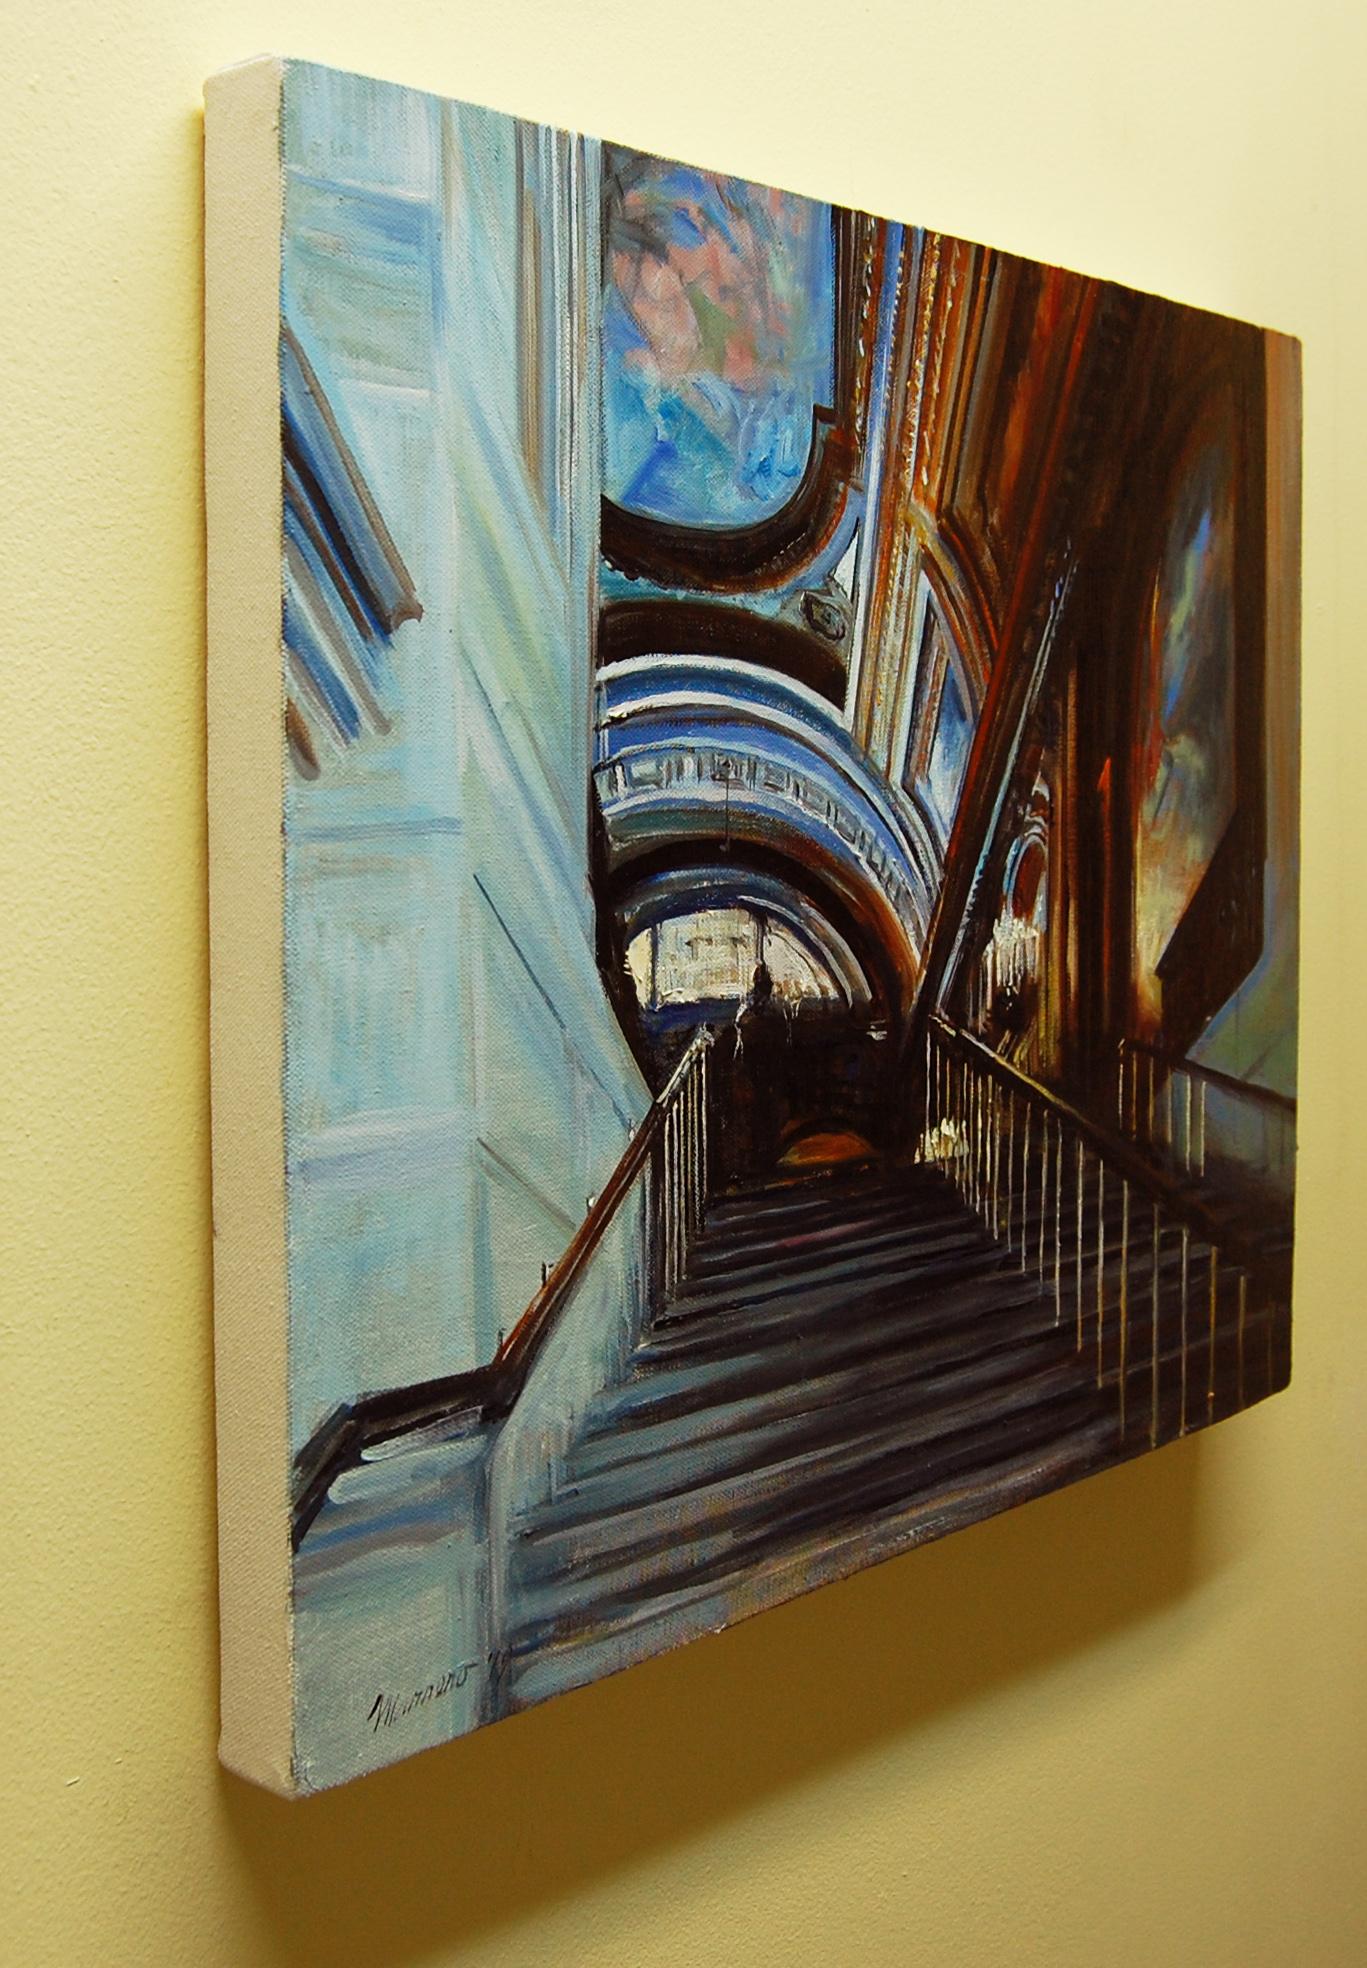 Stairway to a New Journey - Painting by Onelio Marrero